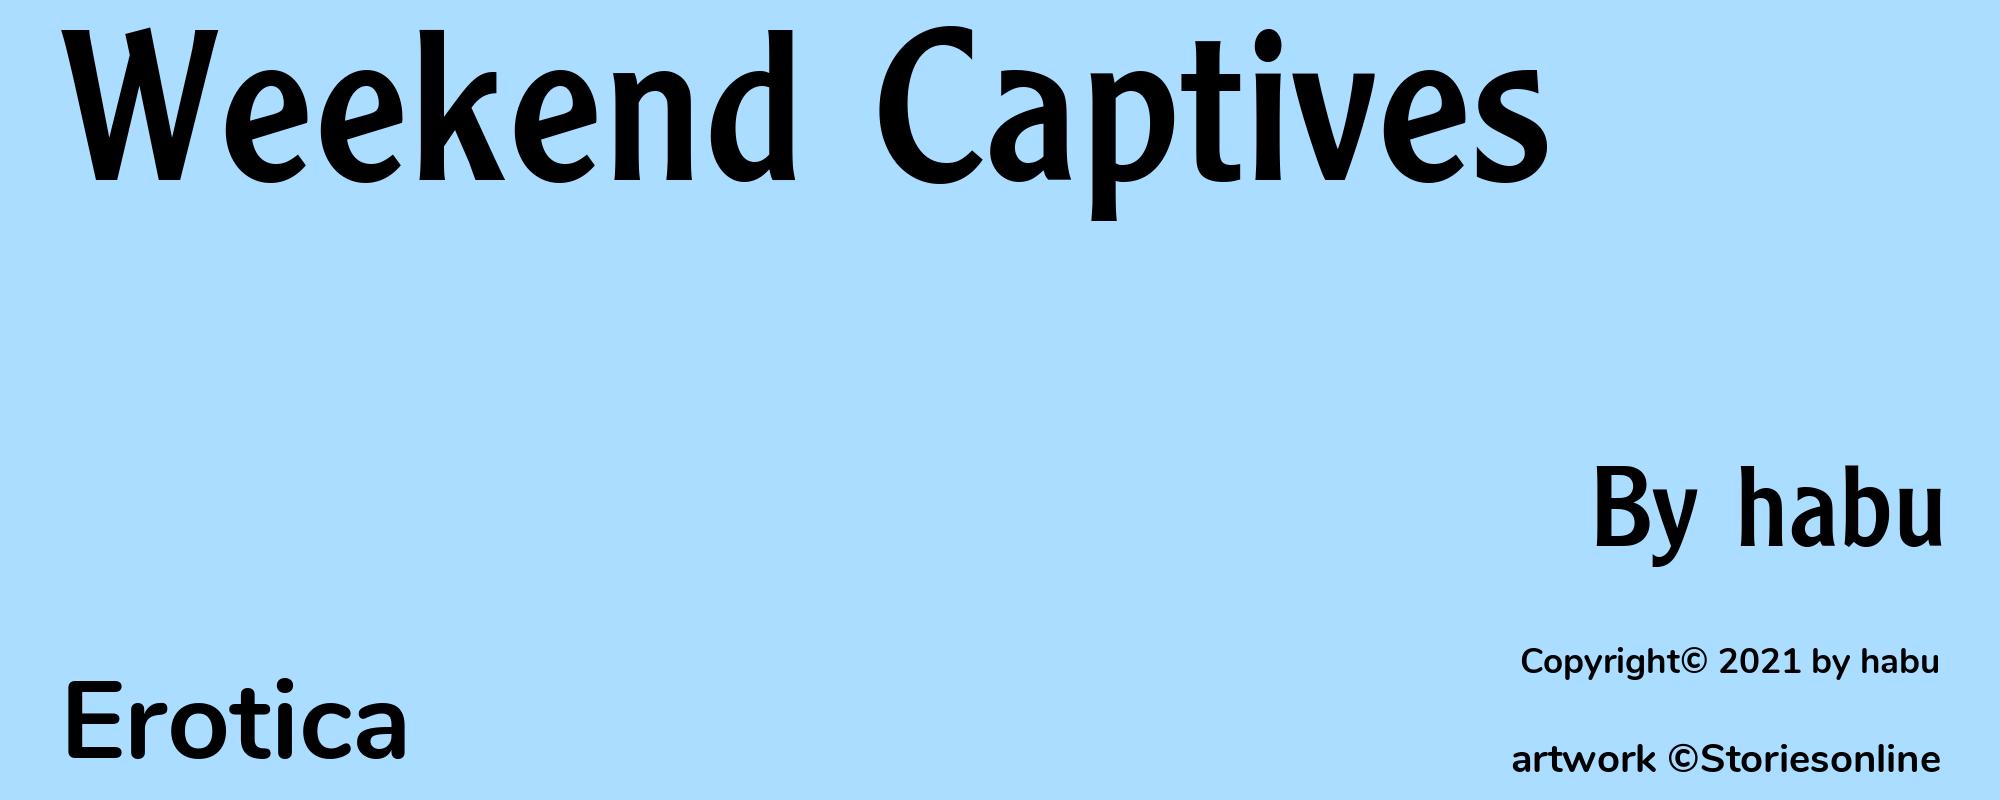 Weekend Captives - Cover